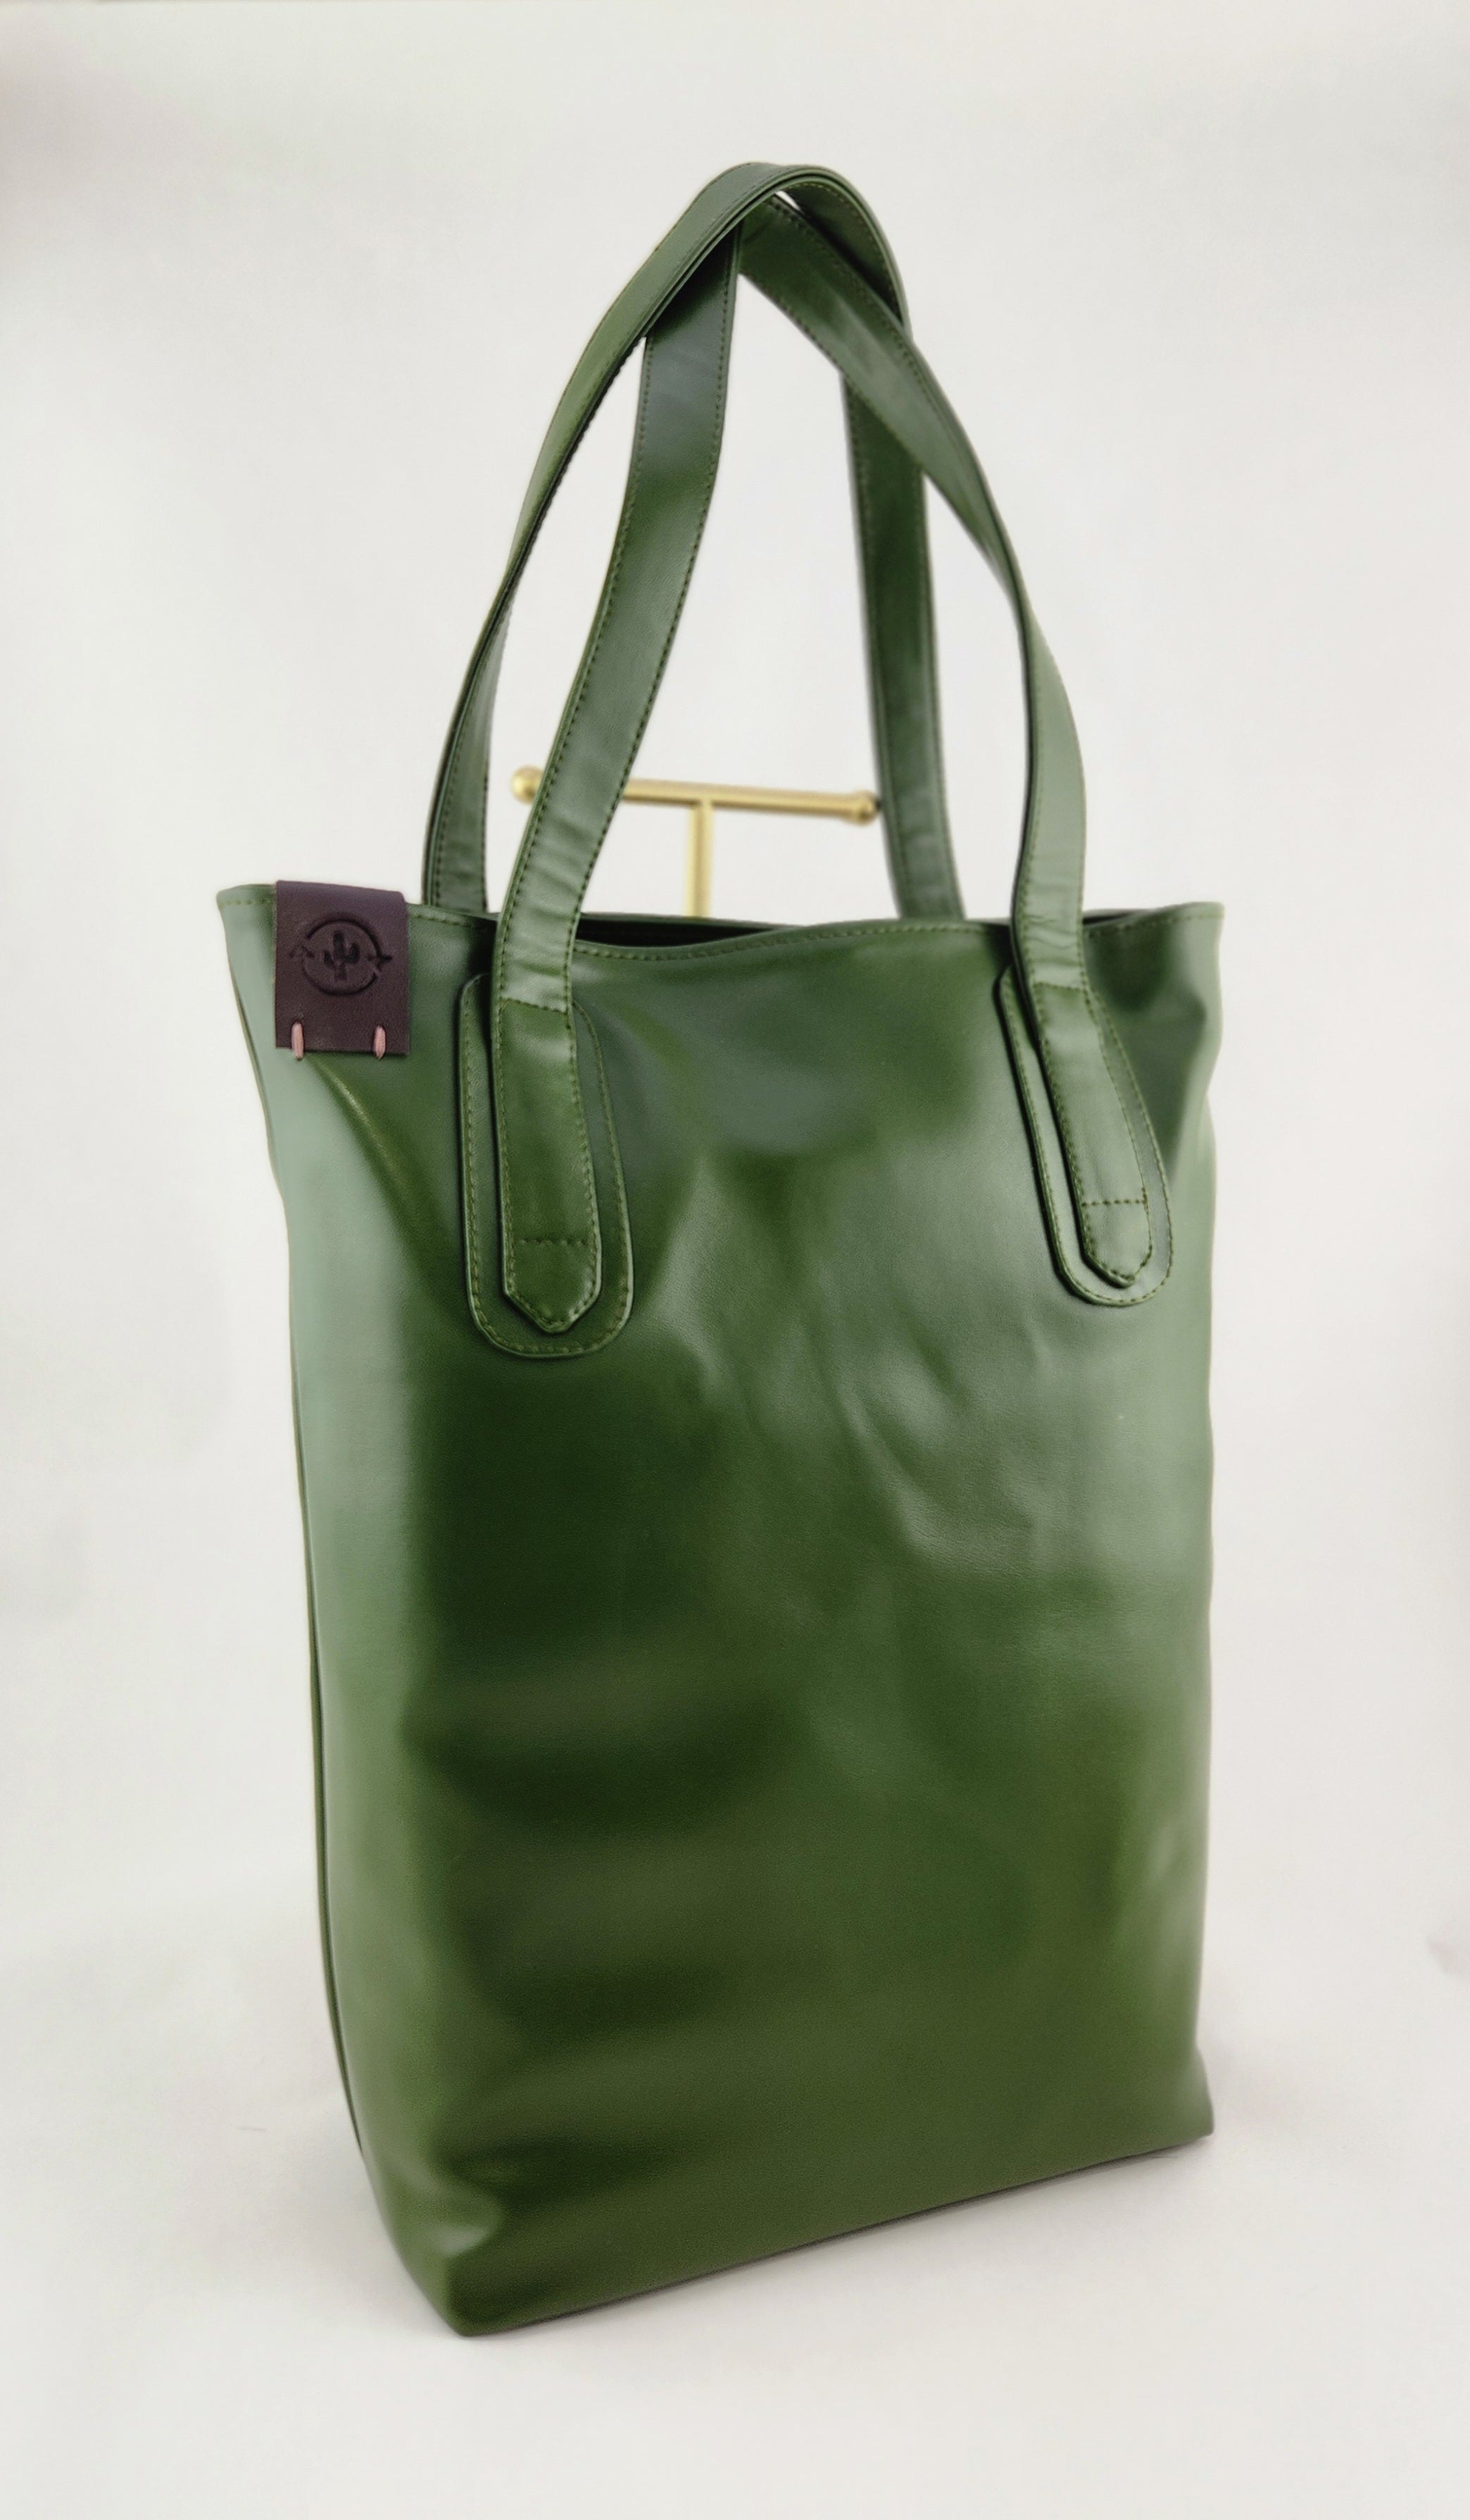 Cactus Leather Tote Bag (Tall)